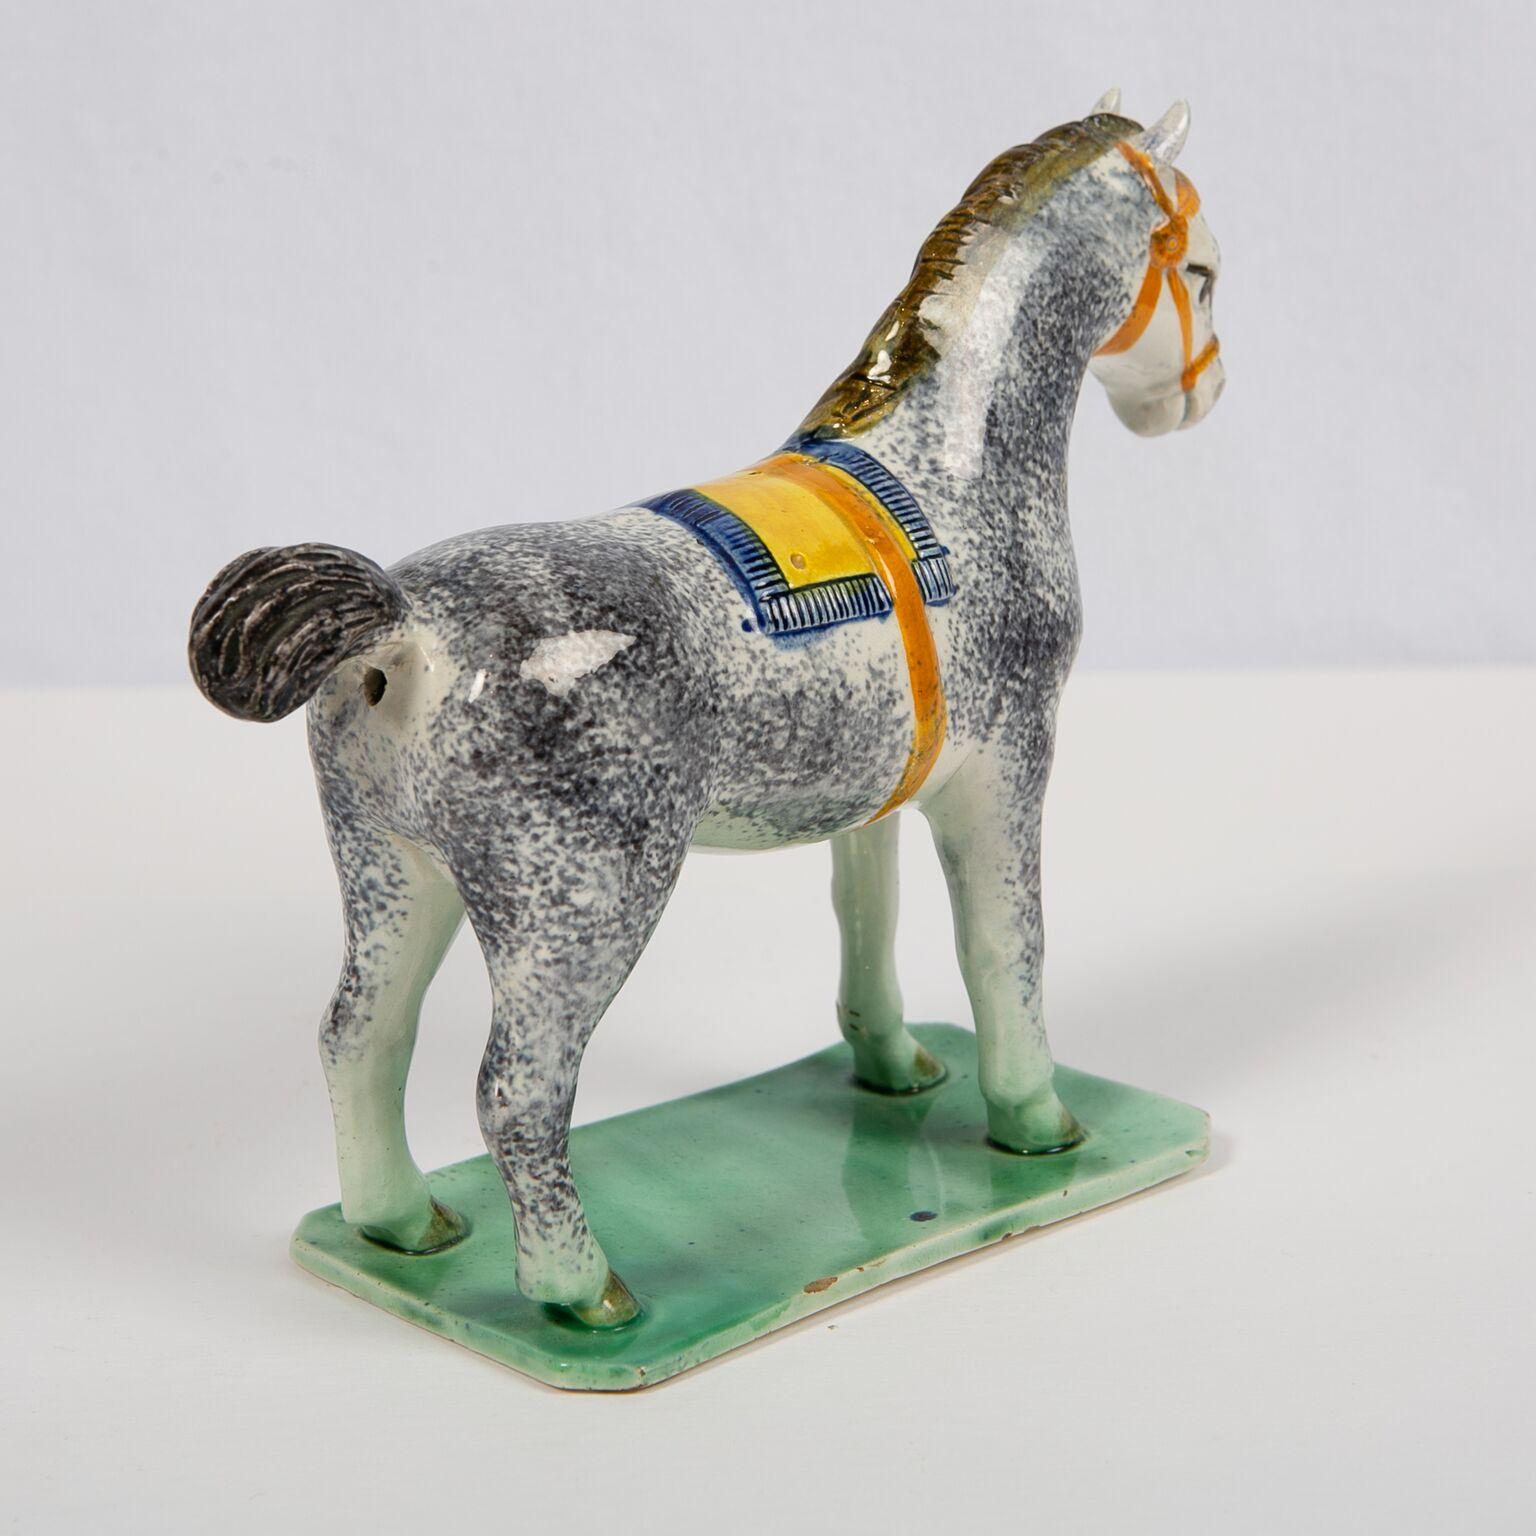 Hand-Painted Antique Pottery Horse Made in England at St. Anthony's Pottery, circa 1800-1810